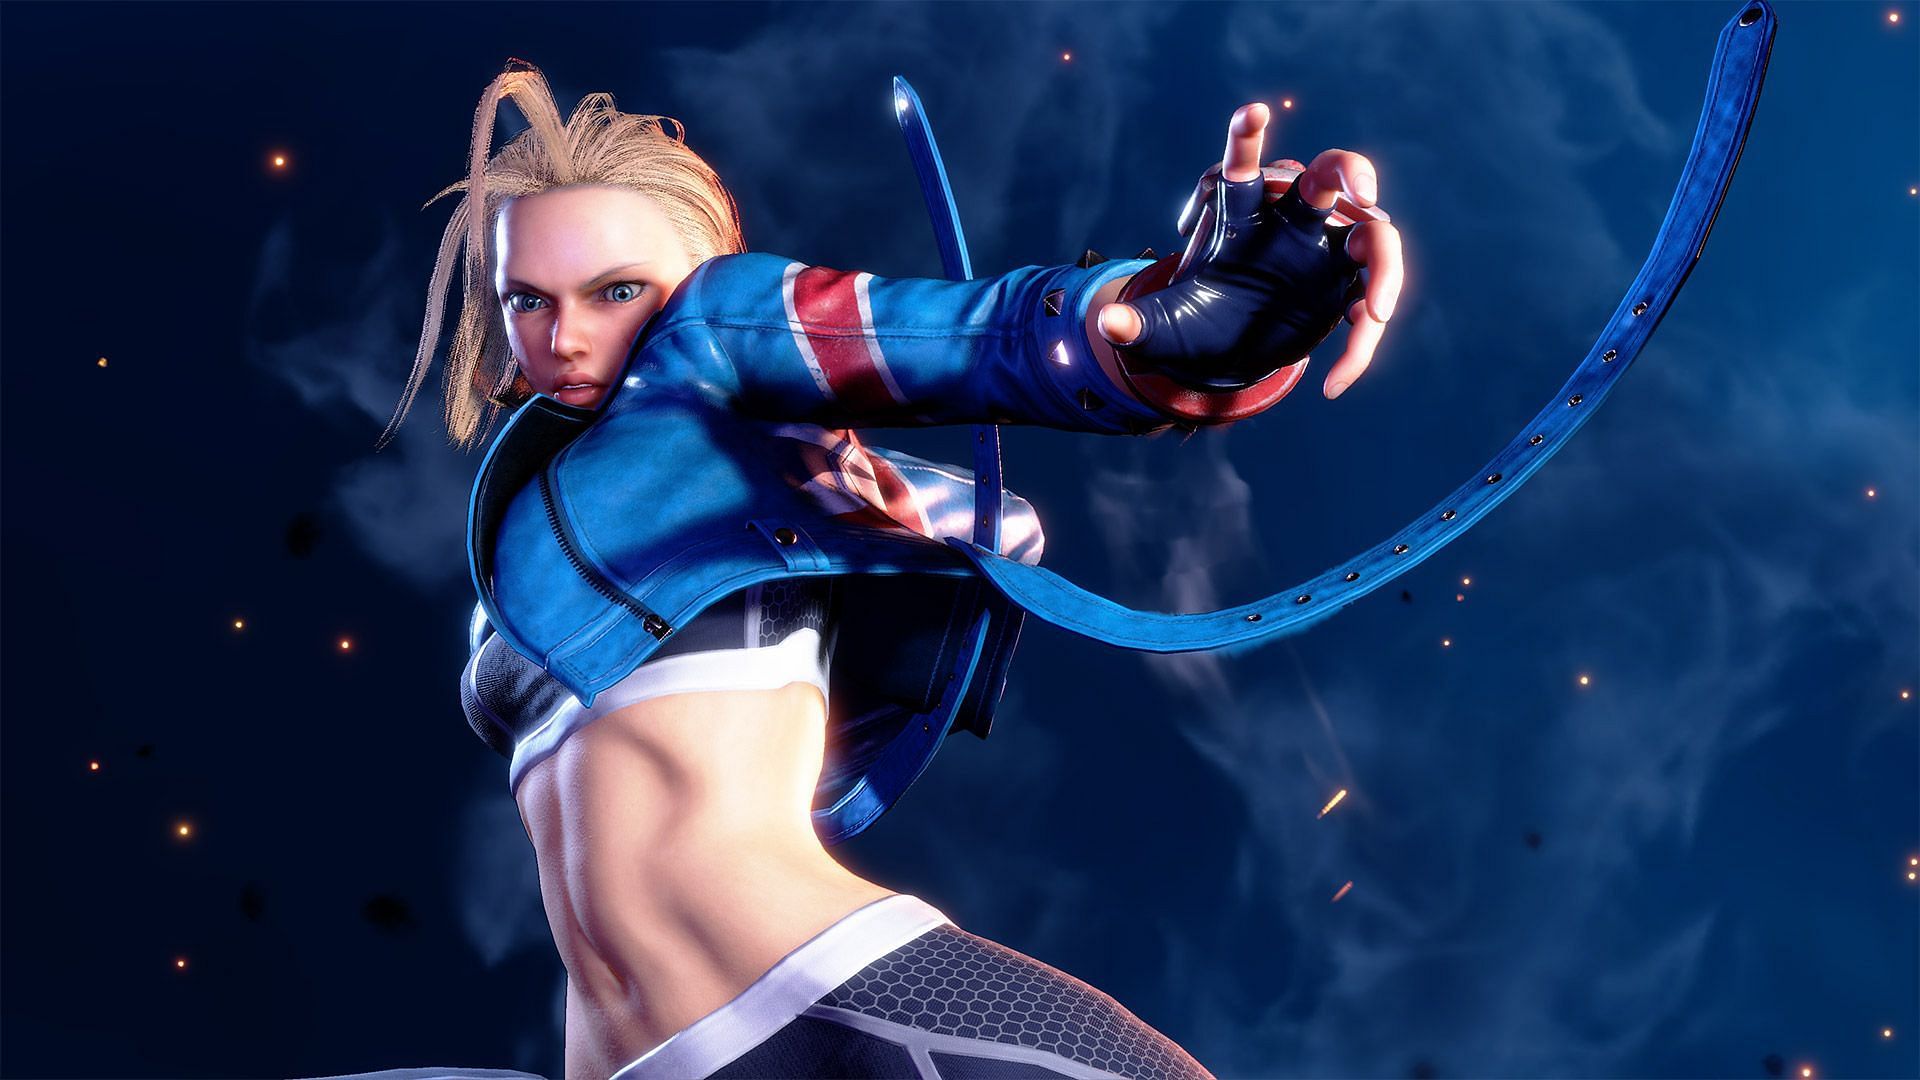 Cammy is a popular character known for her immense love of cats (Image via Street Fighter)